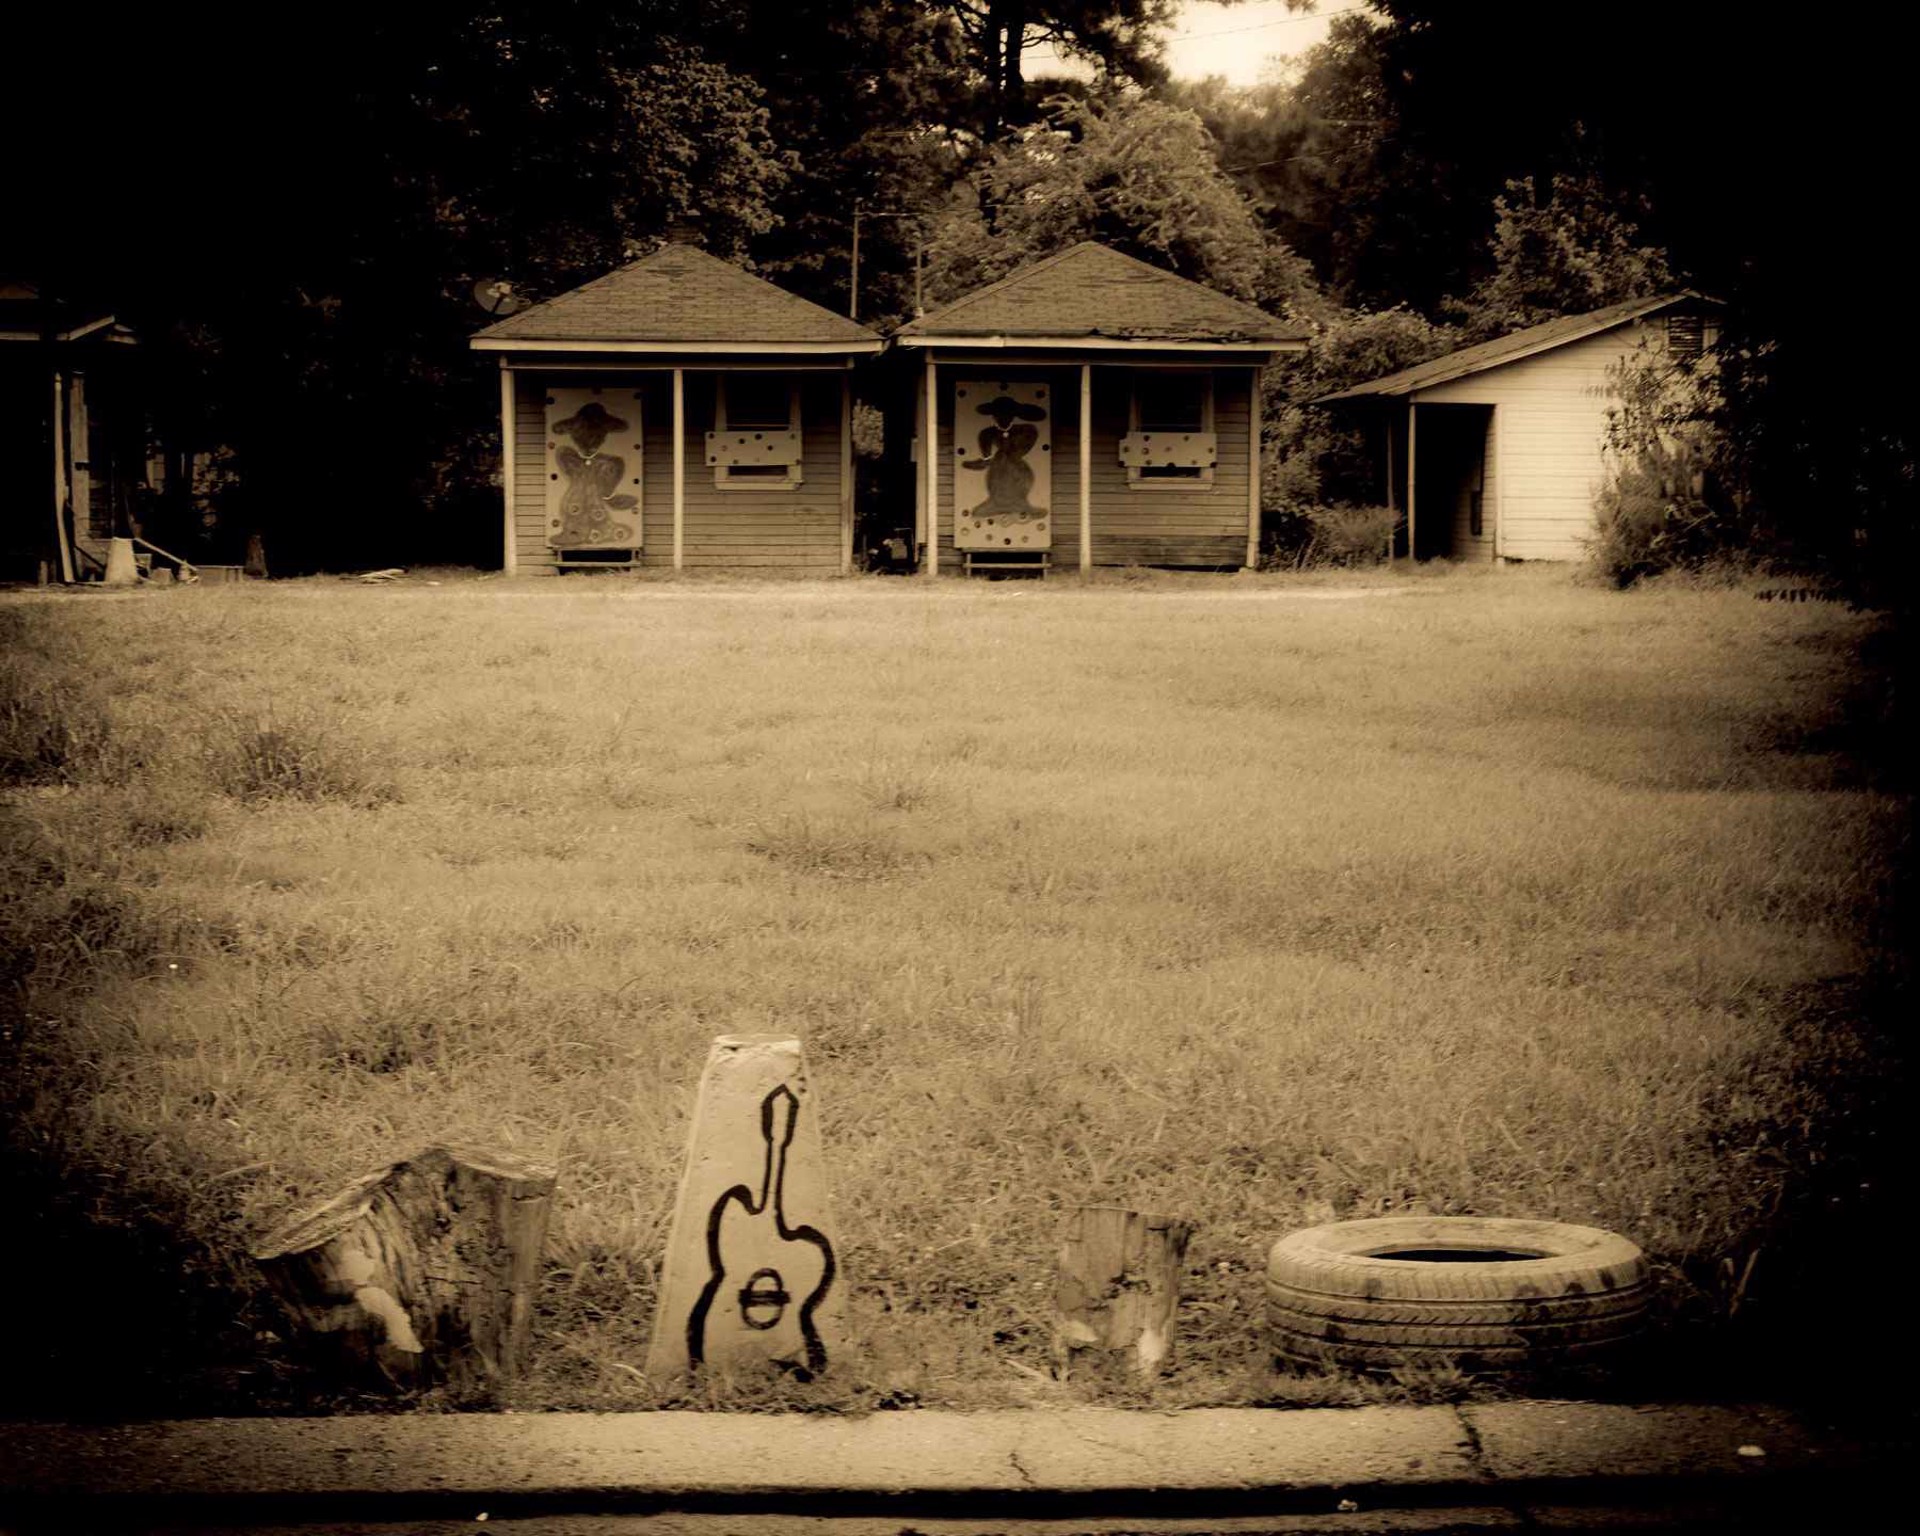 Baptist Town (Blues Area), Greenwood, MS by George Yerger